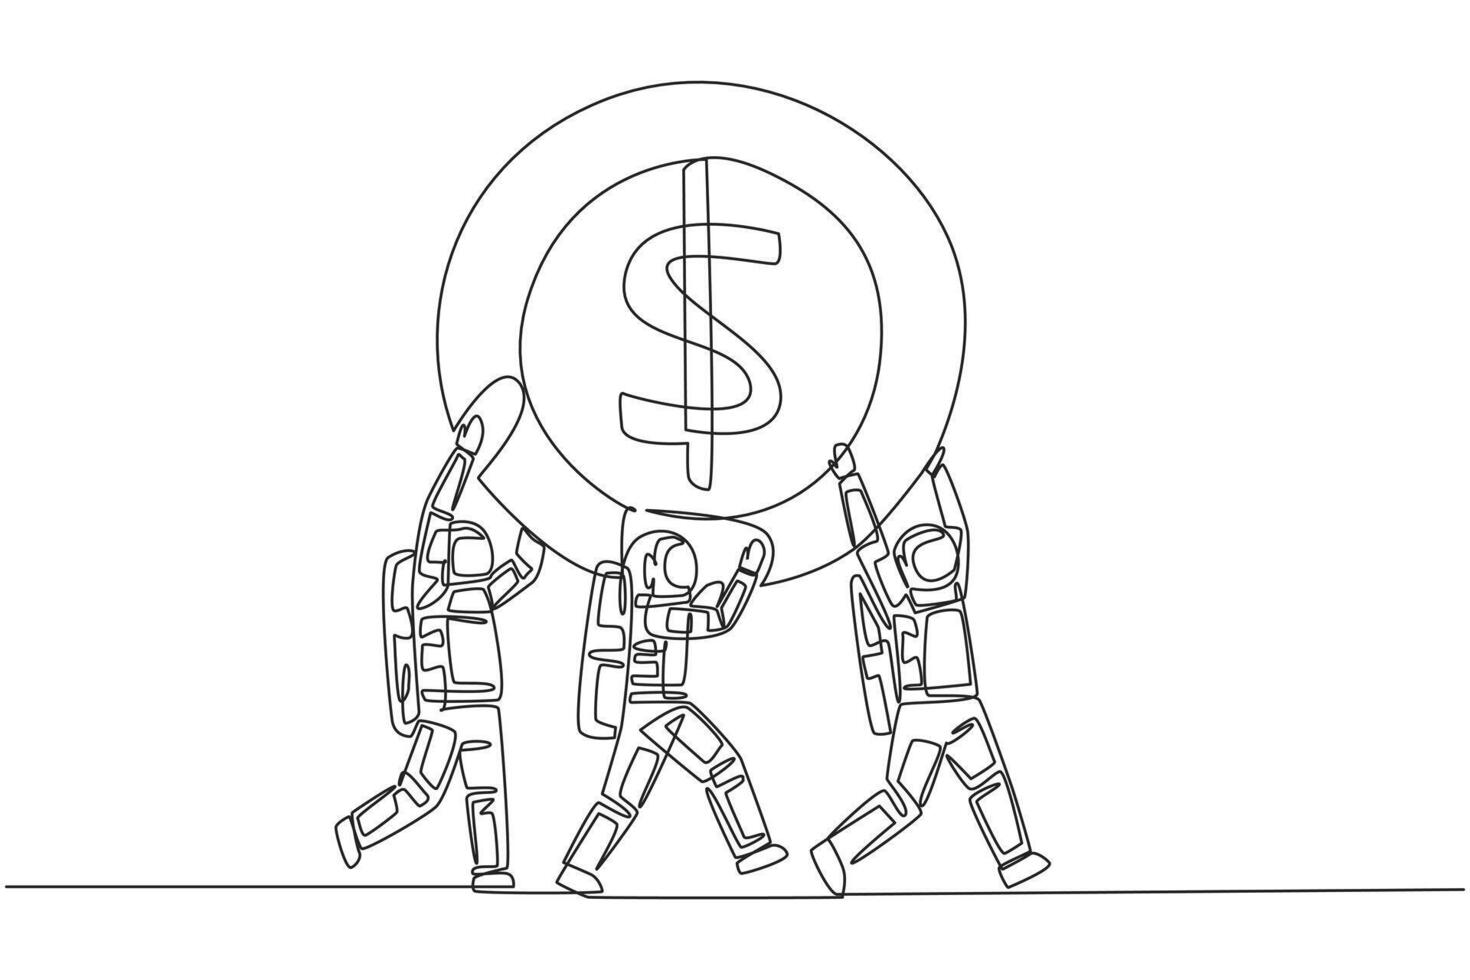 Single continuous line drawing group of astronauts work together carrying a dollar symbol coin. A fruitful expedition. Savings for the next expedition. Spaceman. One line design illustration vector